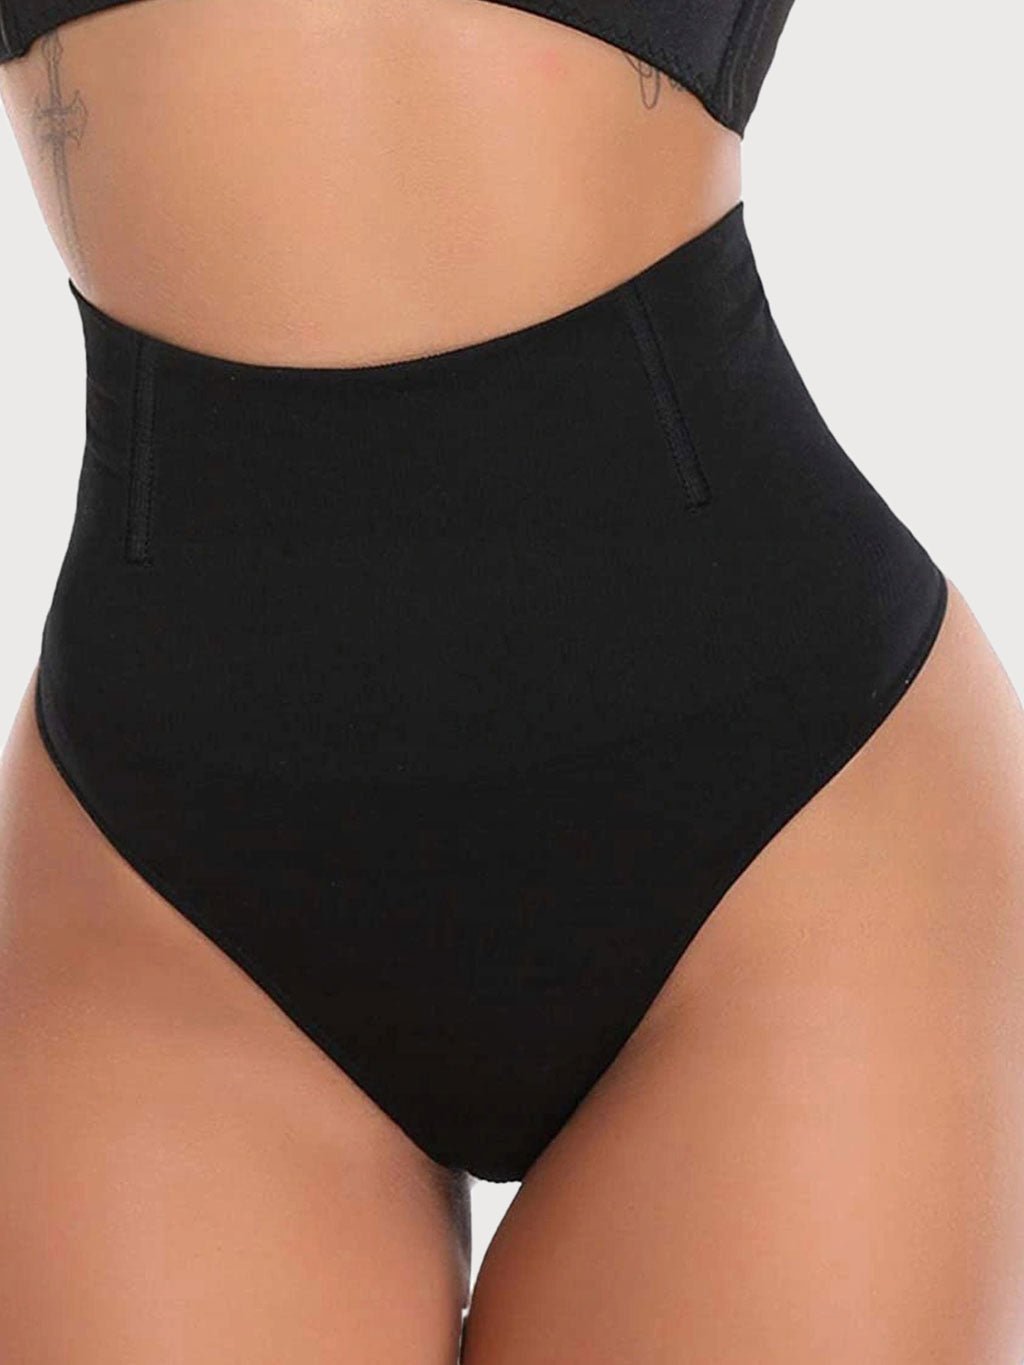 Tummy Control Thong 2 Pack